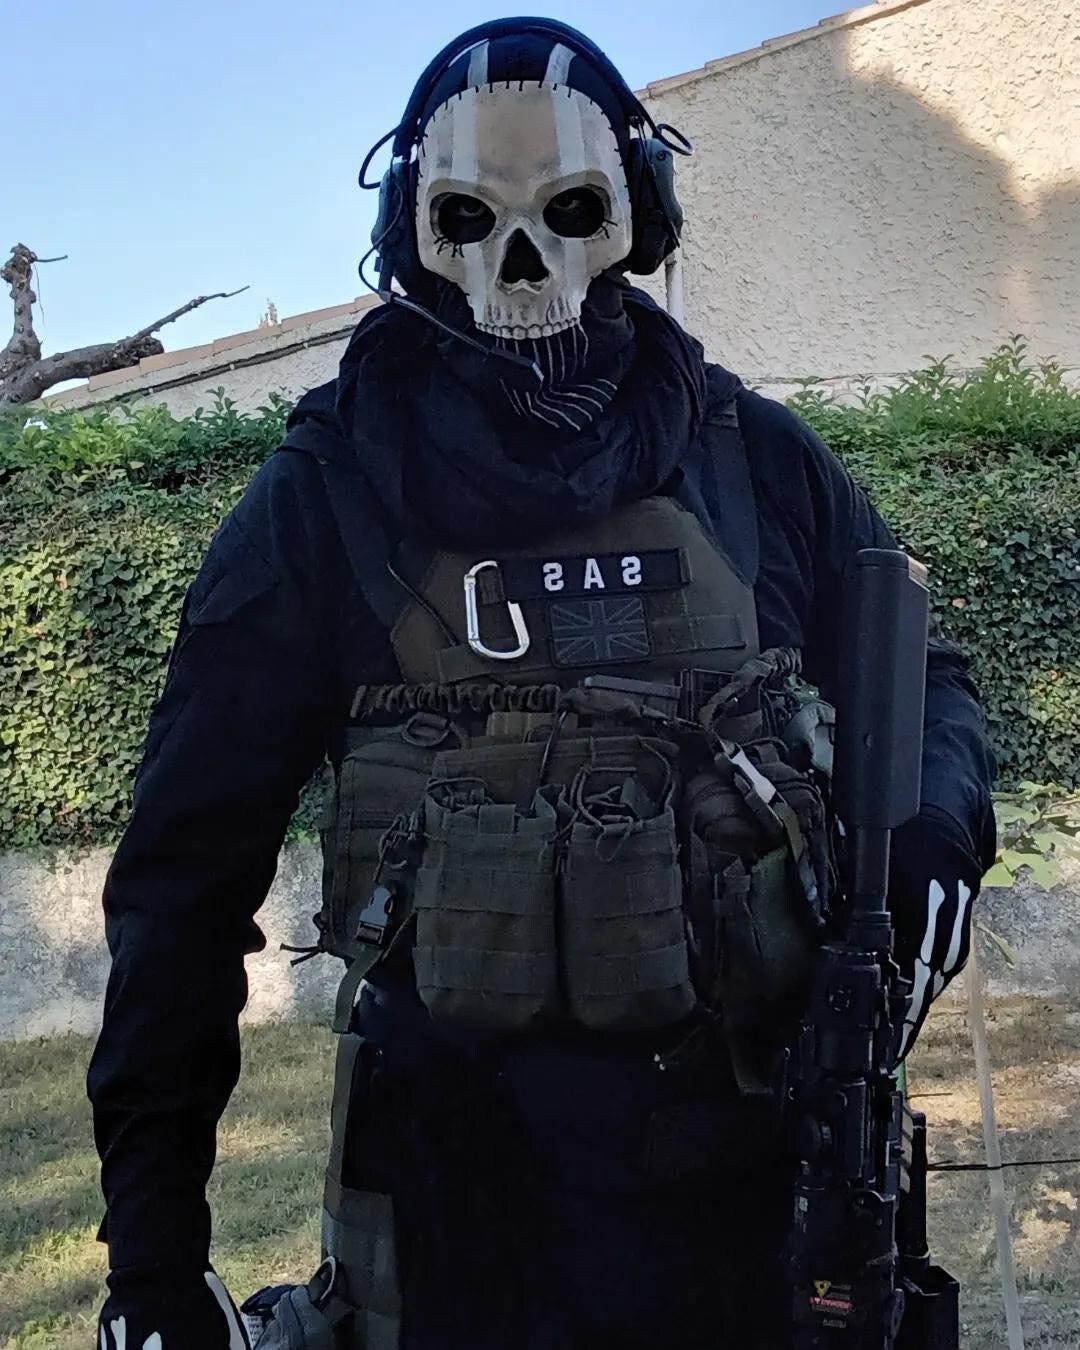 Ghost mask - Operator MW2 airsoft or cosplay - Inspire Uplift